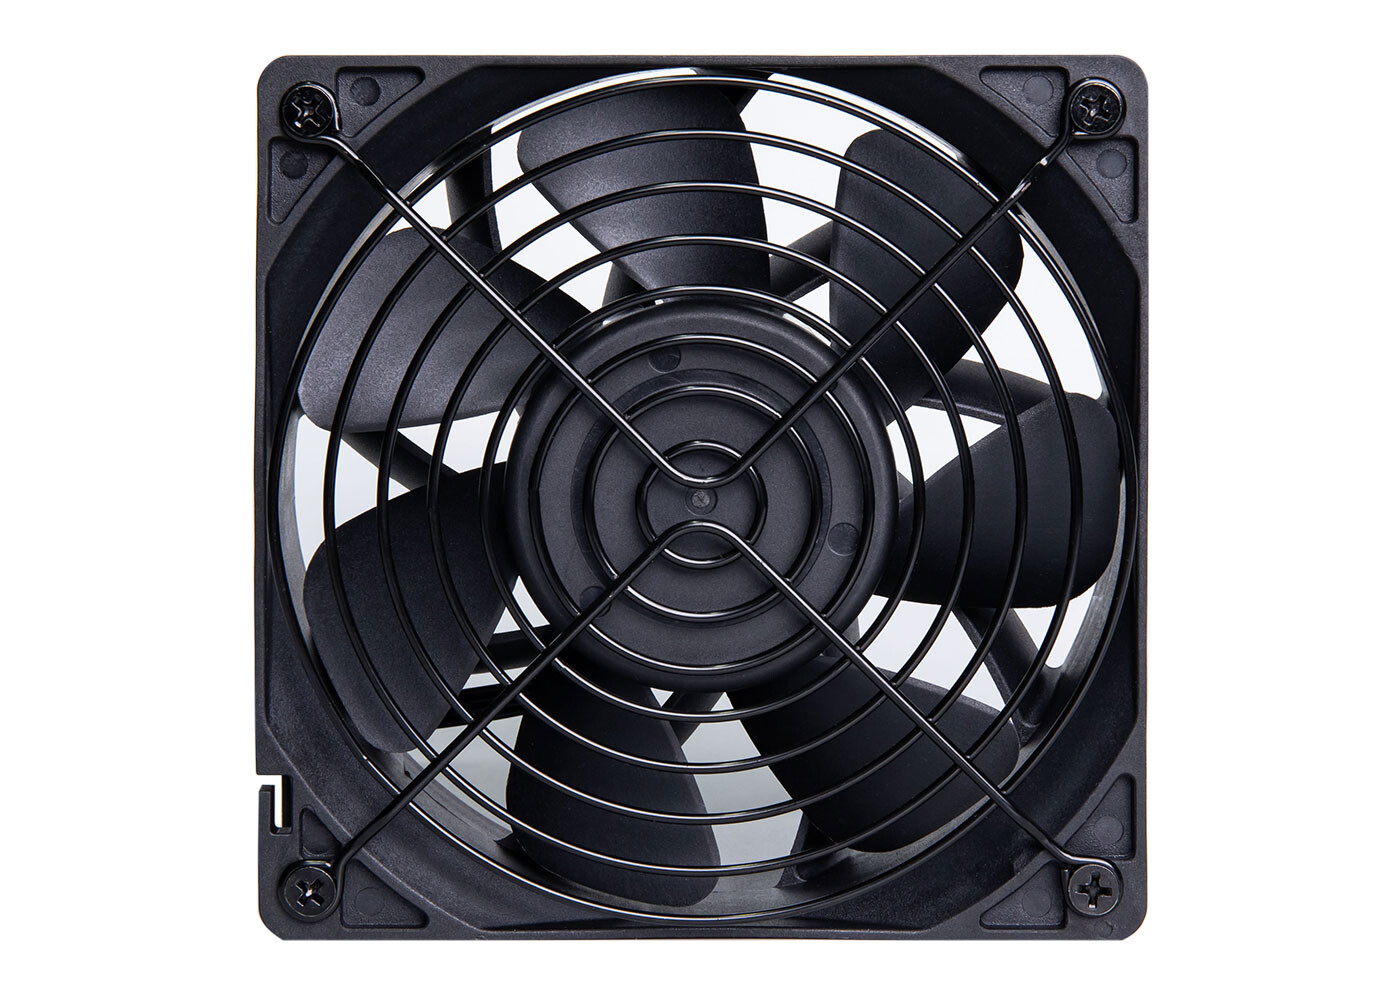 GELID Announces the Gale and Gale Extreme Fans | TechPowerUp